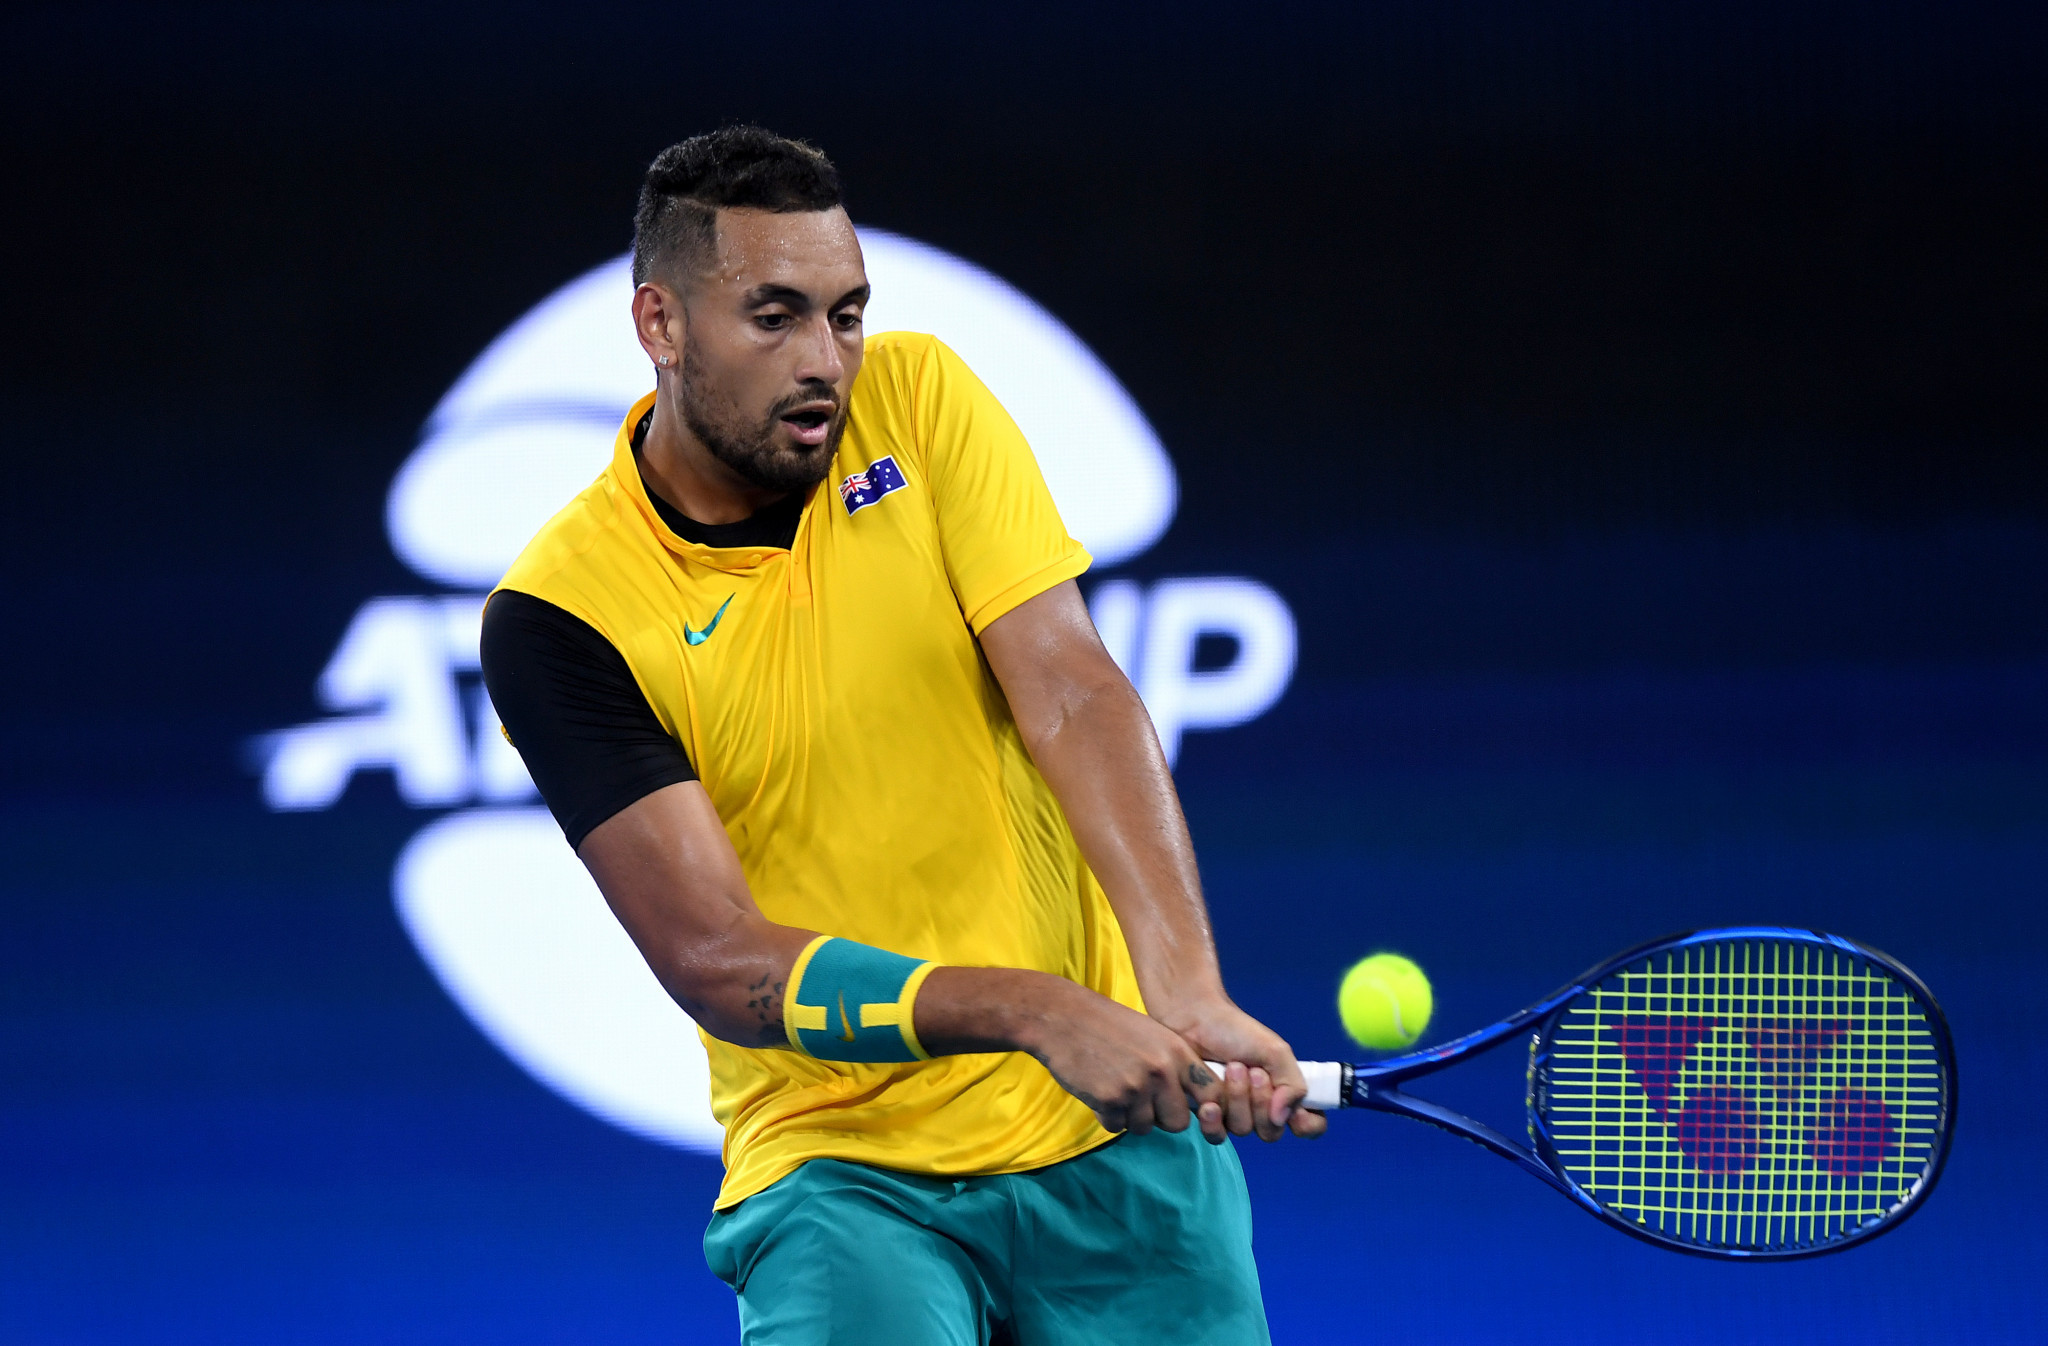  Australian tennis player Nick Kyrgios used his platform at the ATP Cup to raise awareness about the bush fires in his country ©Getty Images